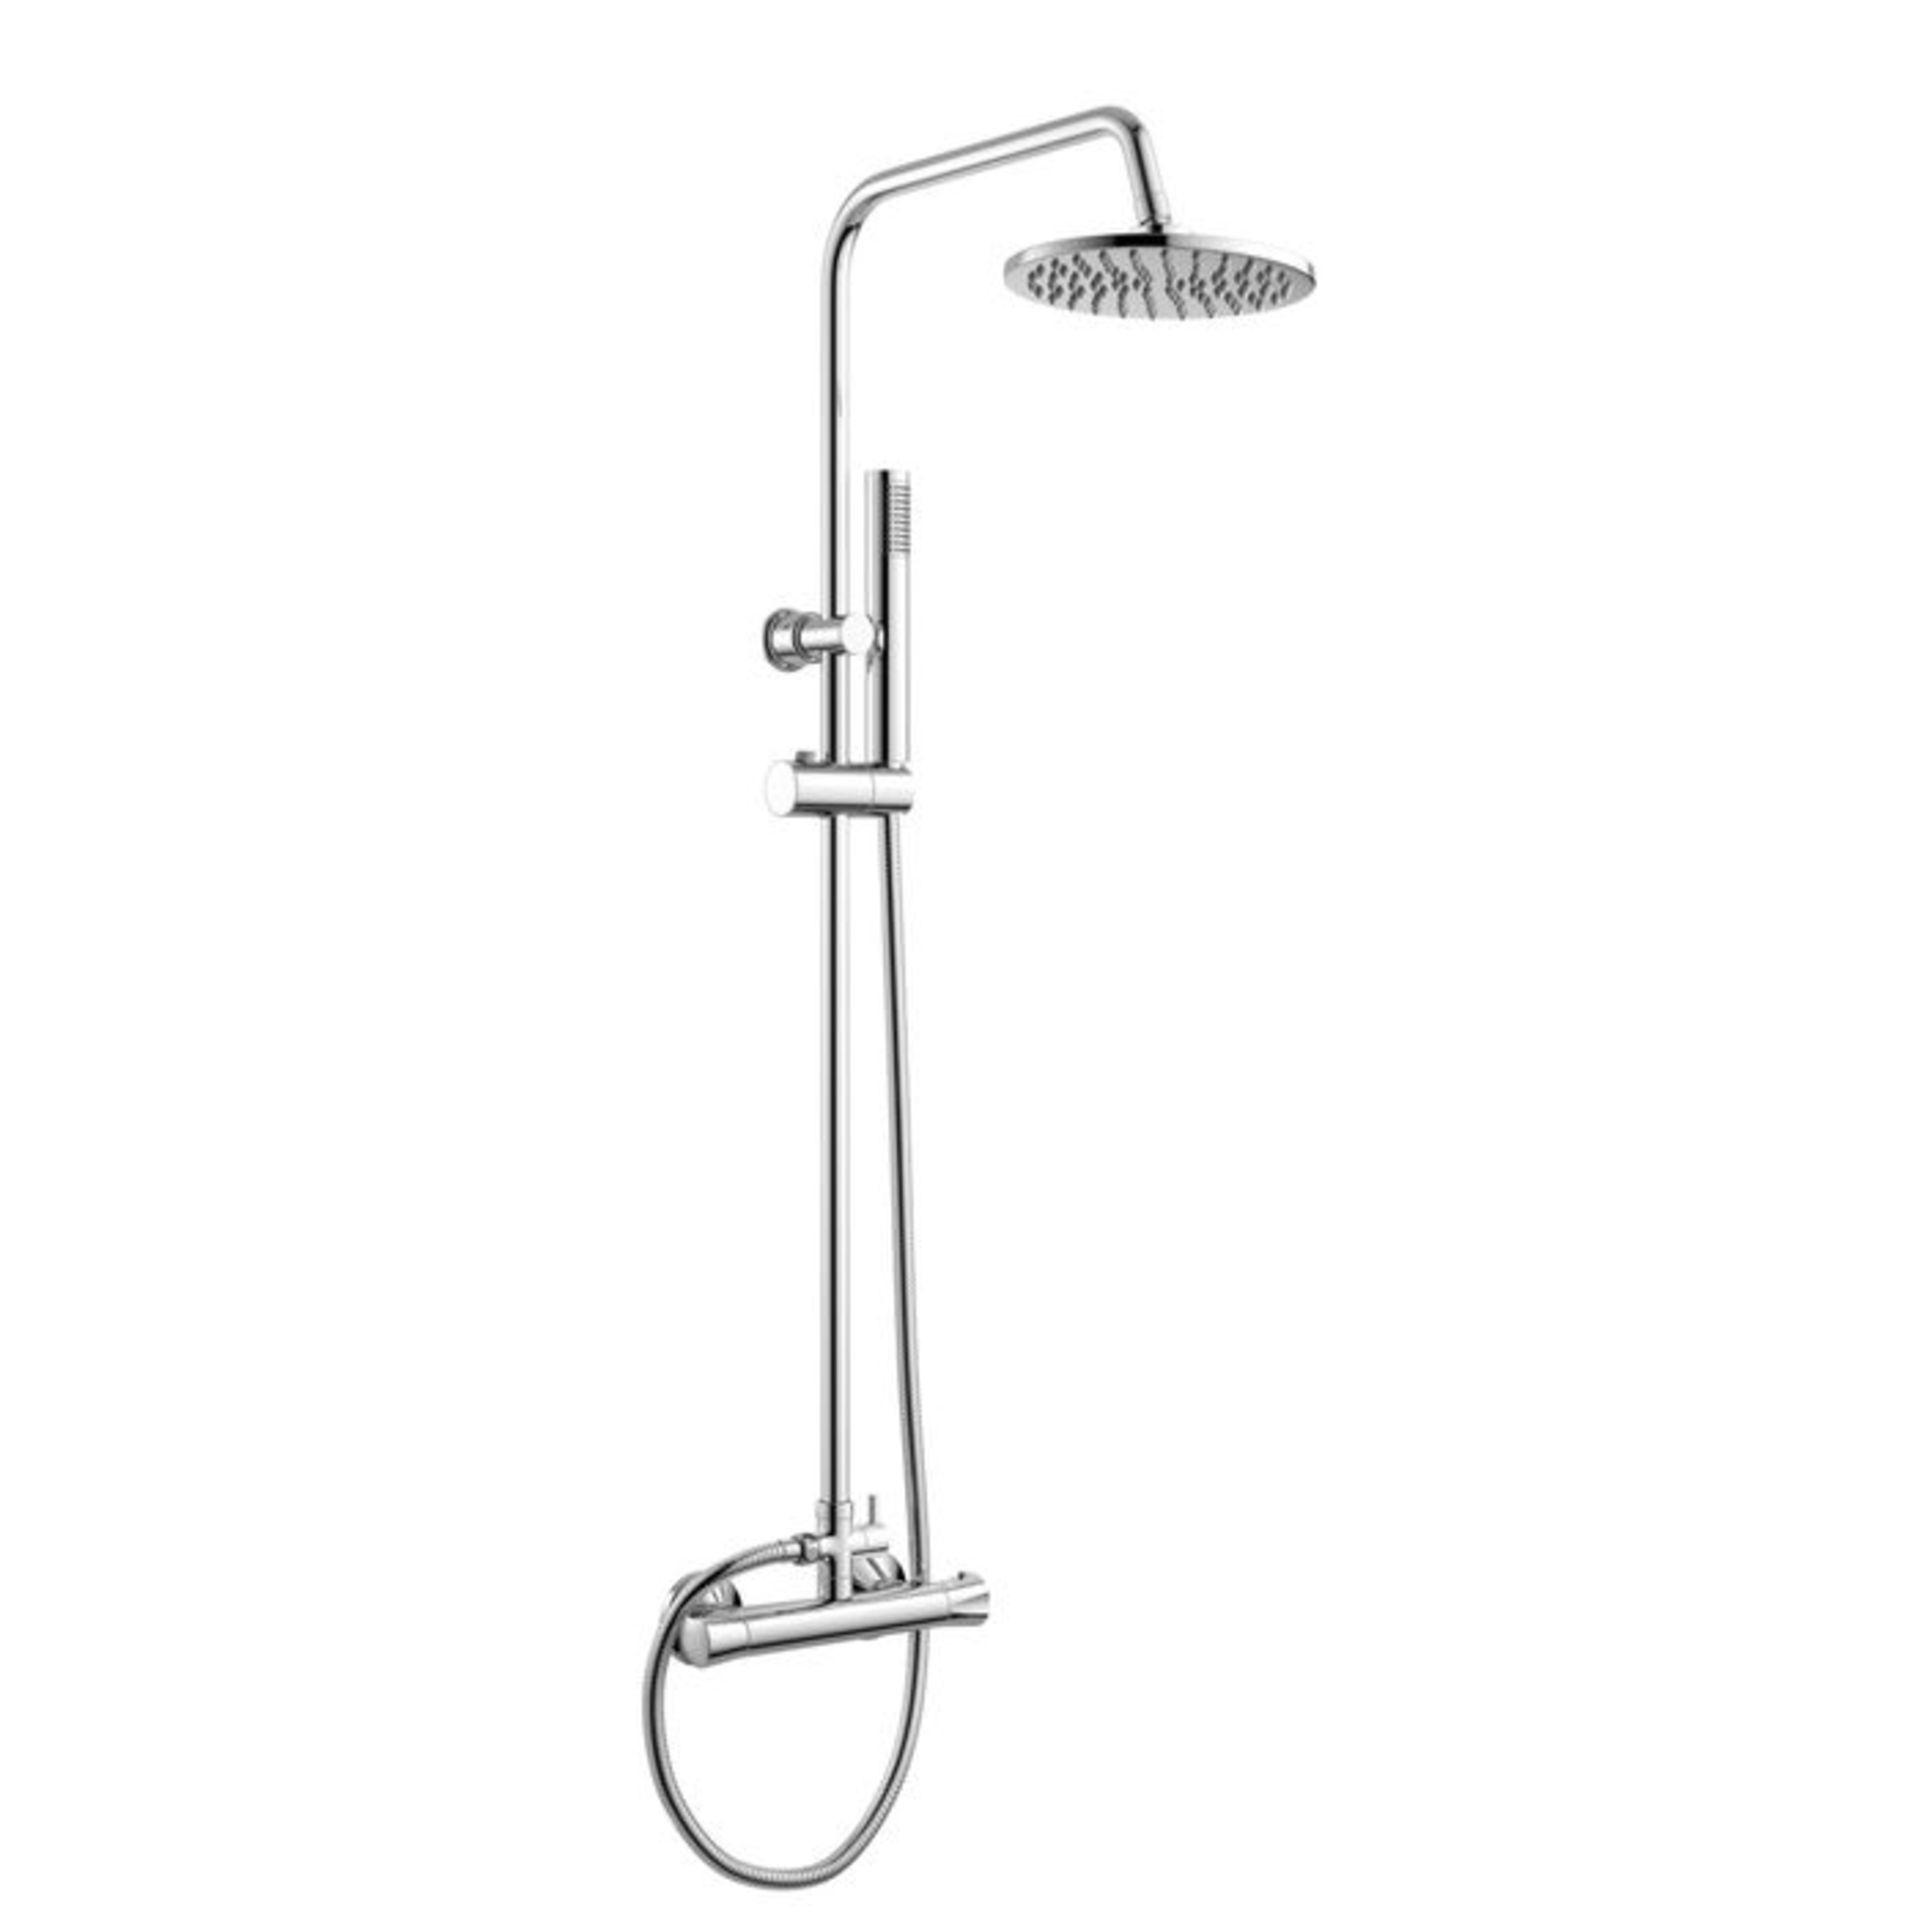 (Z71) Round Exposed Thermostatic Shower Kit Medium Head. They say three is a magic number, which - Image 3 of 5